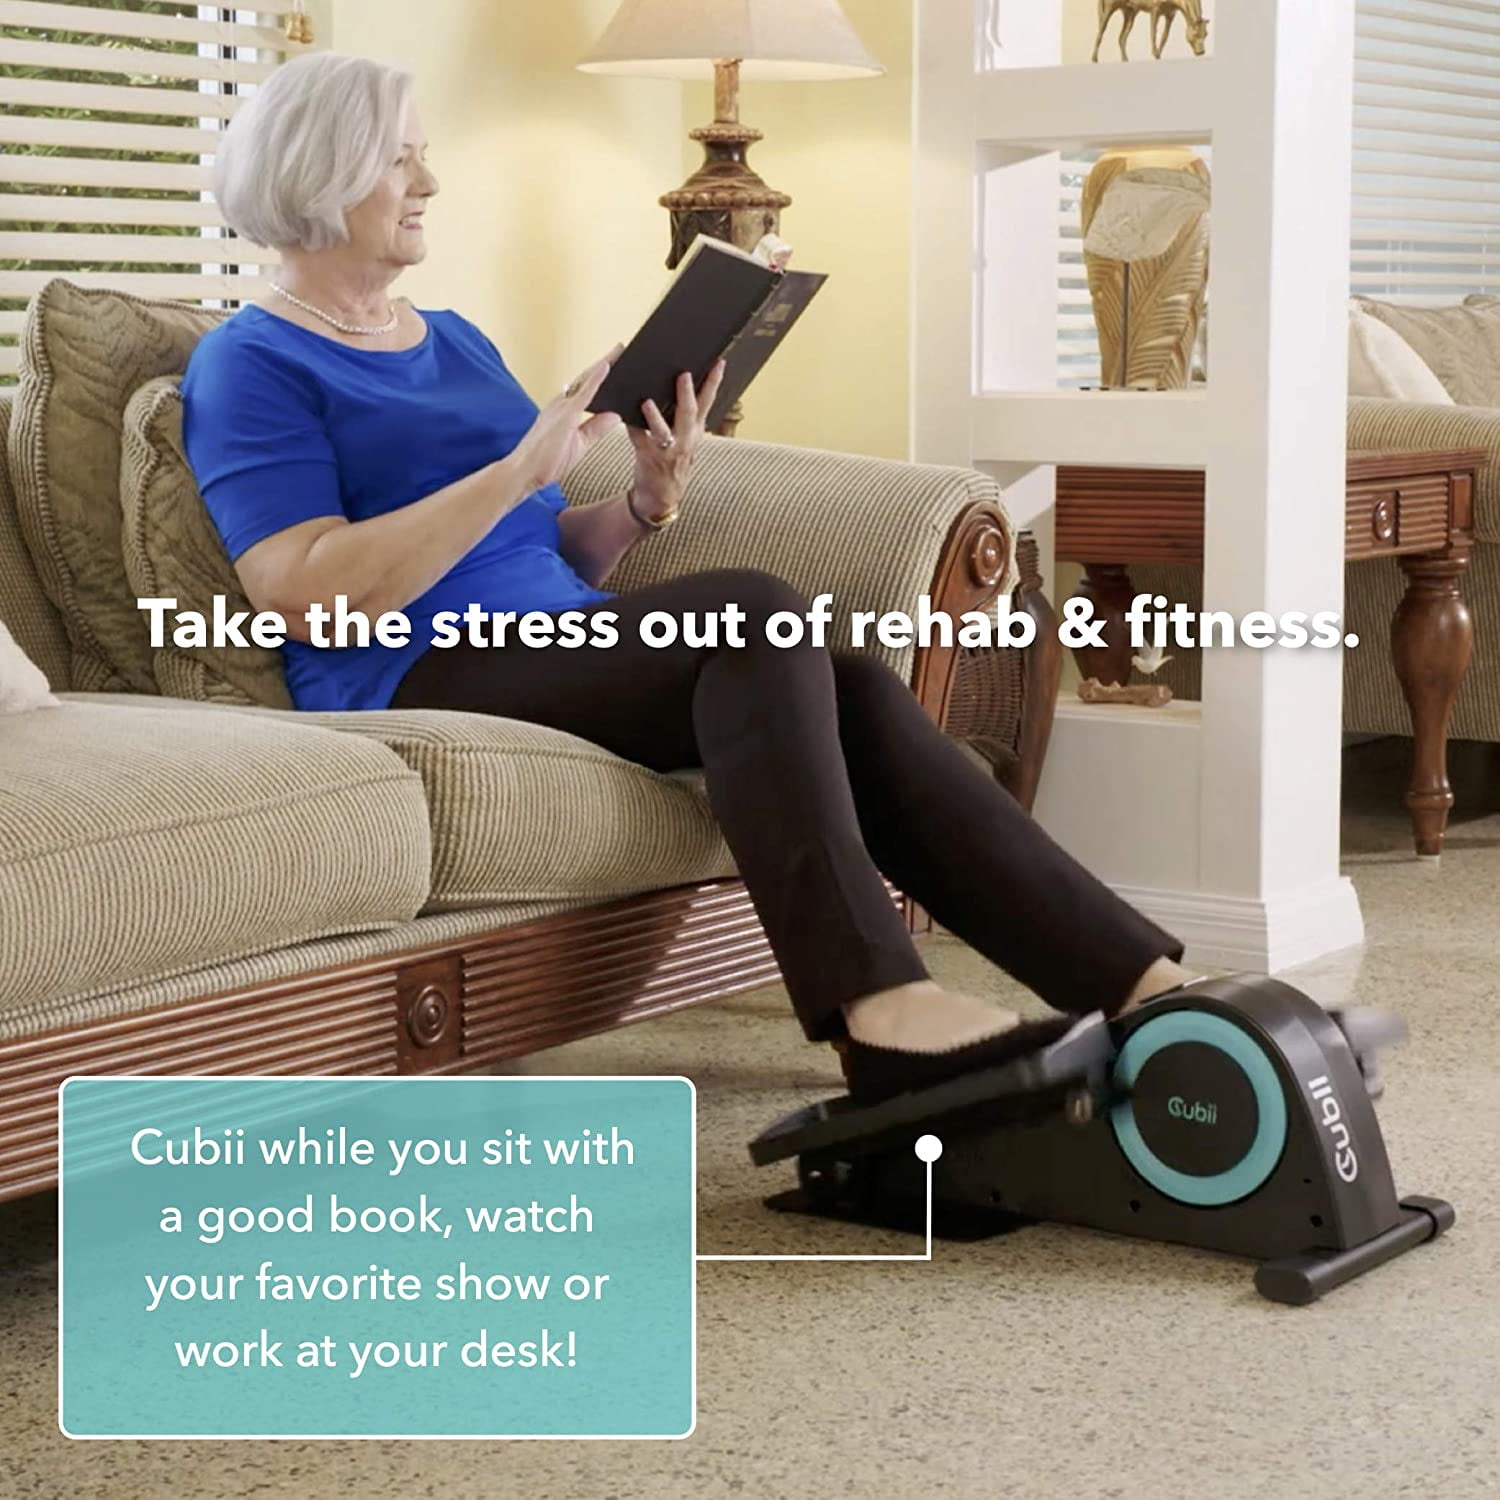 www.buycubii.com - Keep Moving While You Sit / Twitter